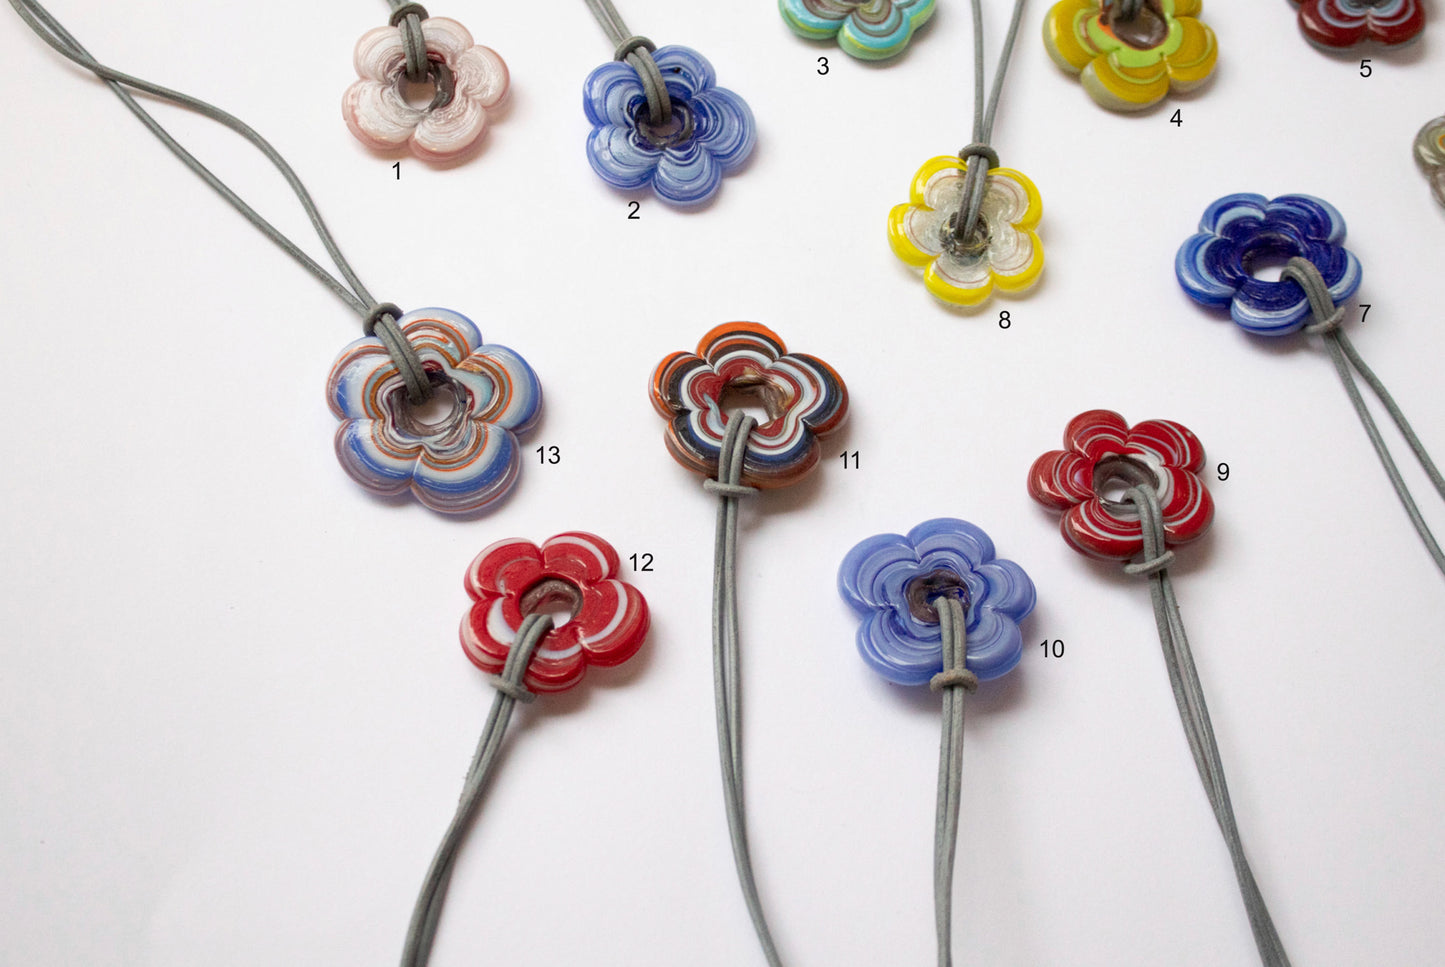 Multicolored Flower Necklaces - Pick Your Favorite